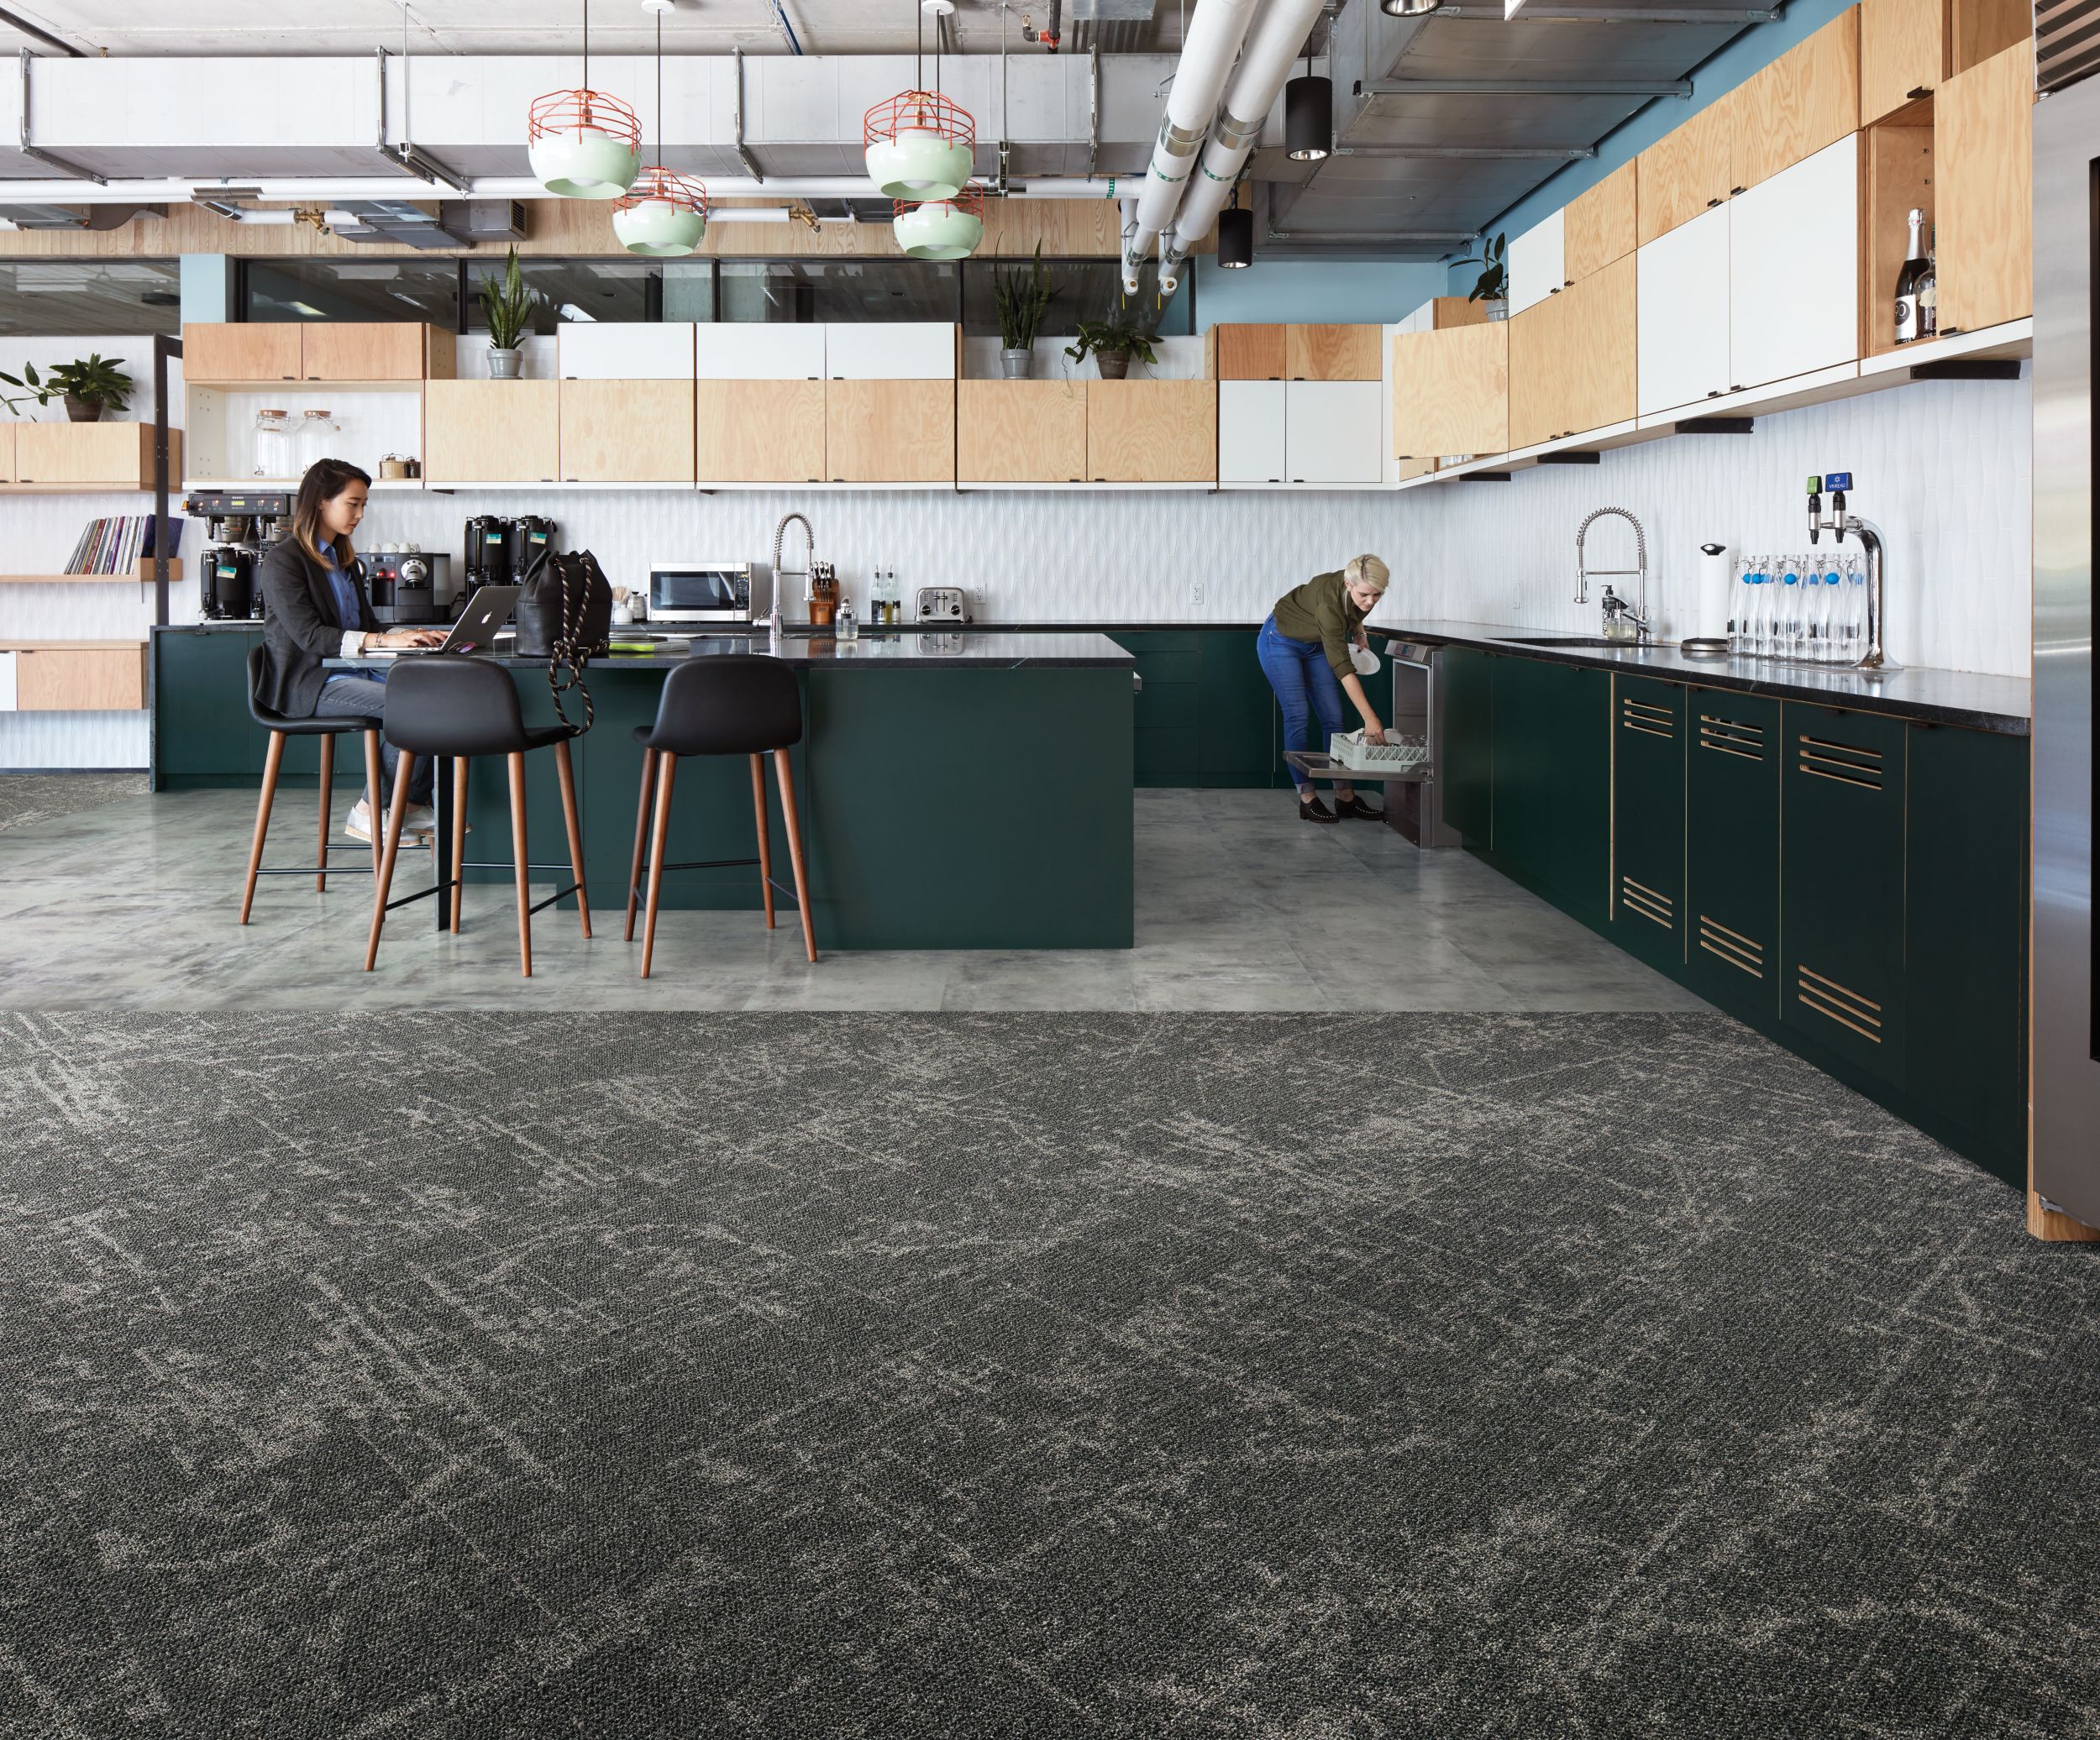 Interface Ice Breaker carpet tile and Textured Stones LVT in kitchen area with women lodaing dish washer and women working on computer afbeeldingnummer 6